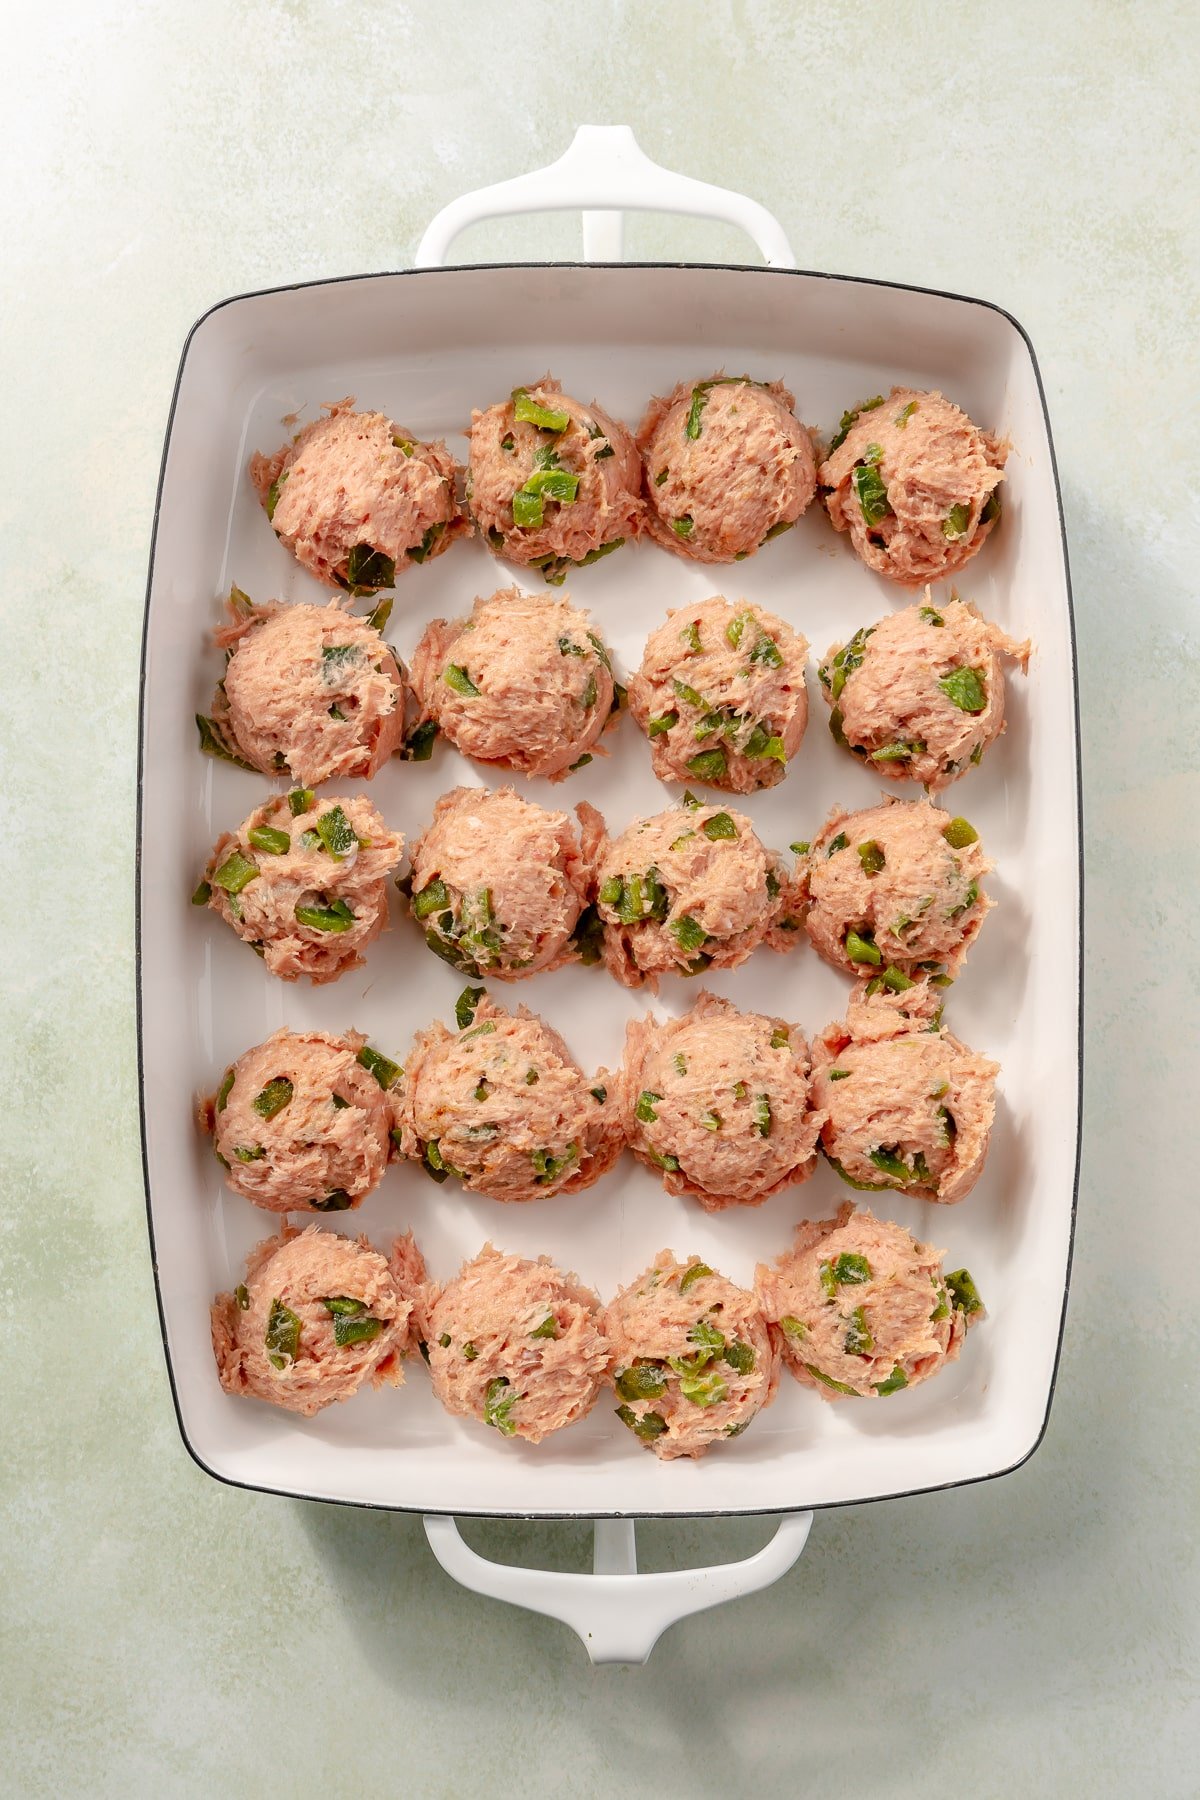 Balls of turkey meatball mixture sit in a white baking tray.